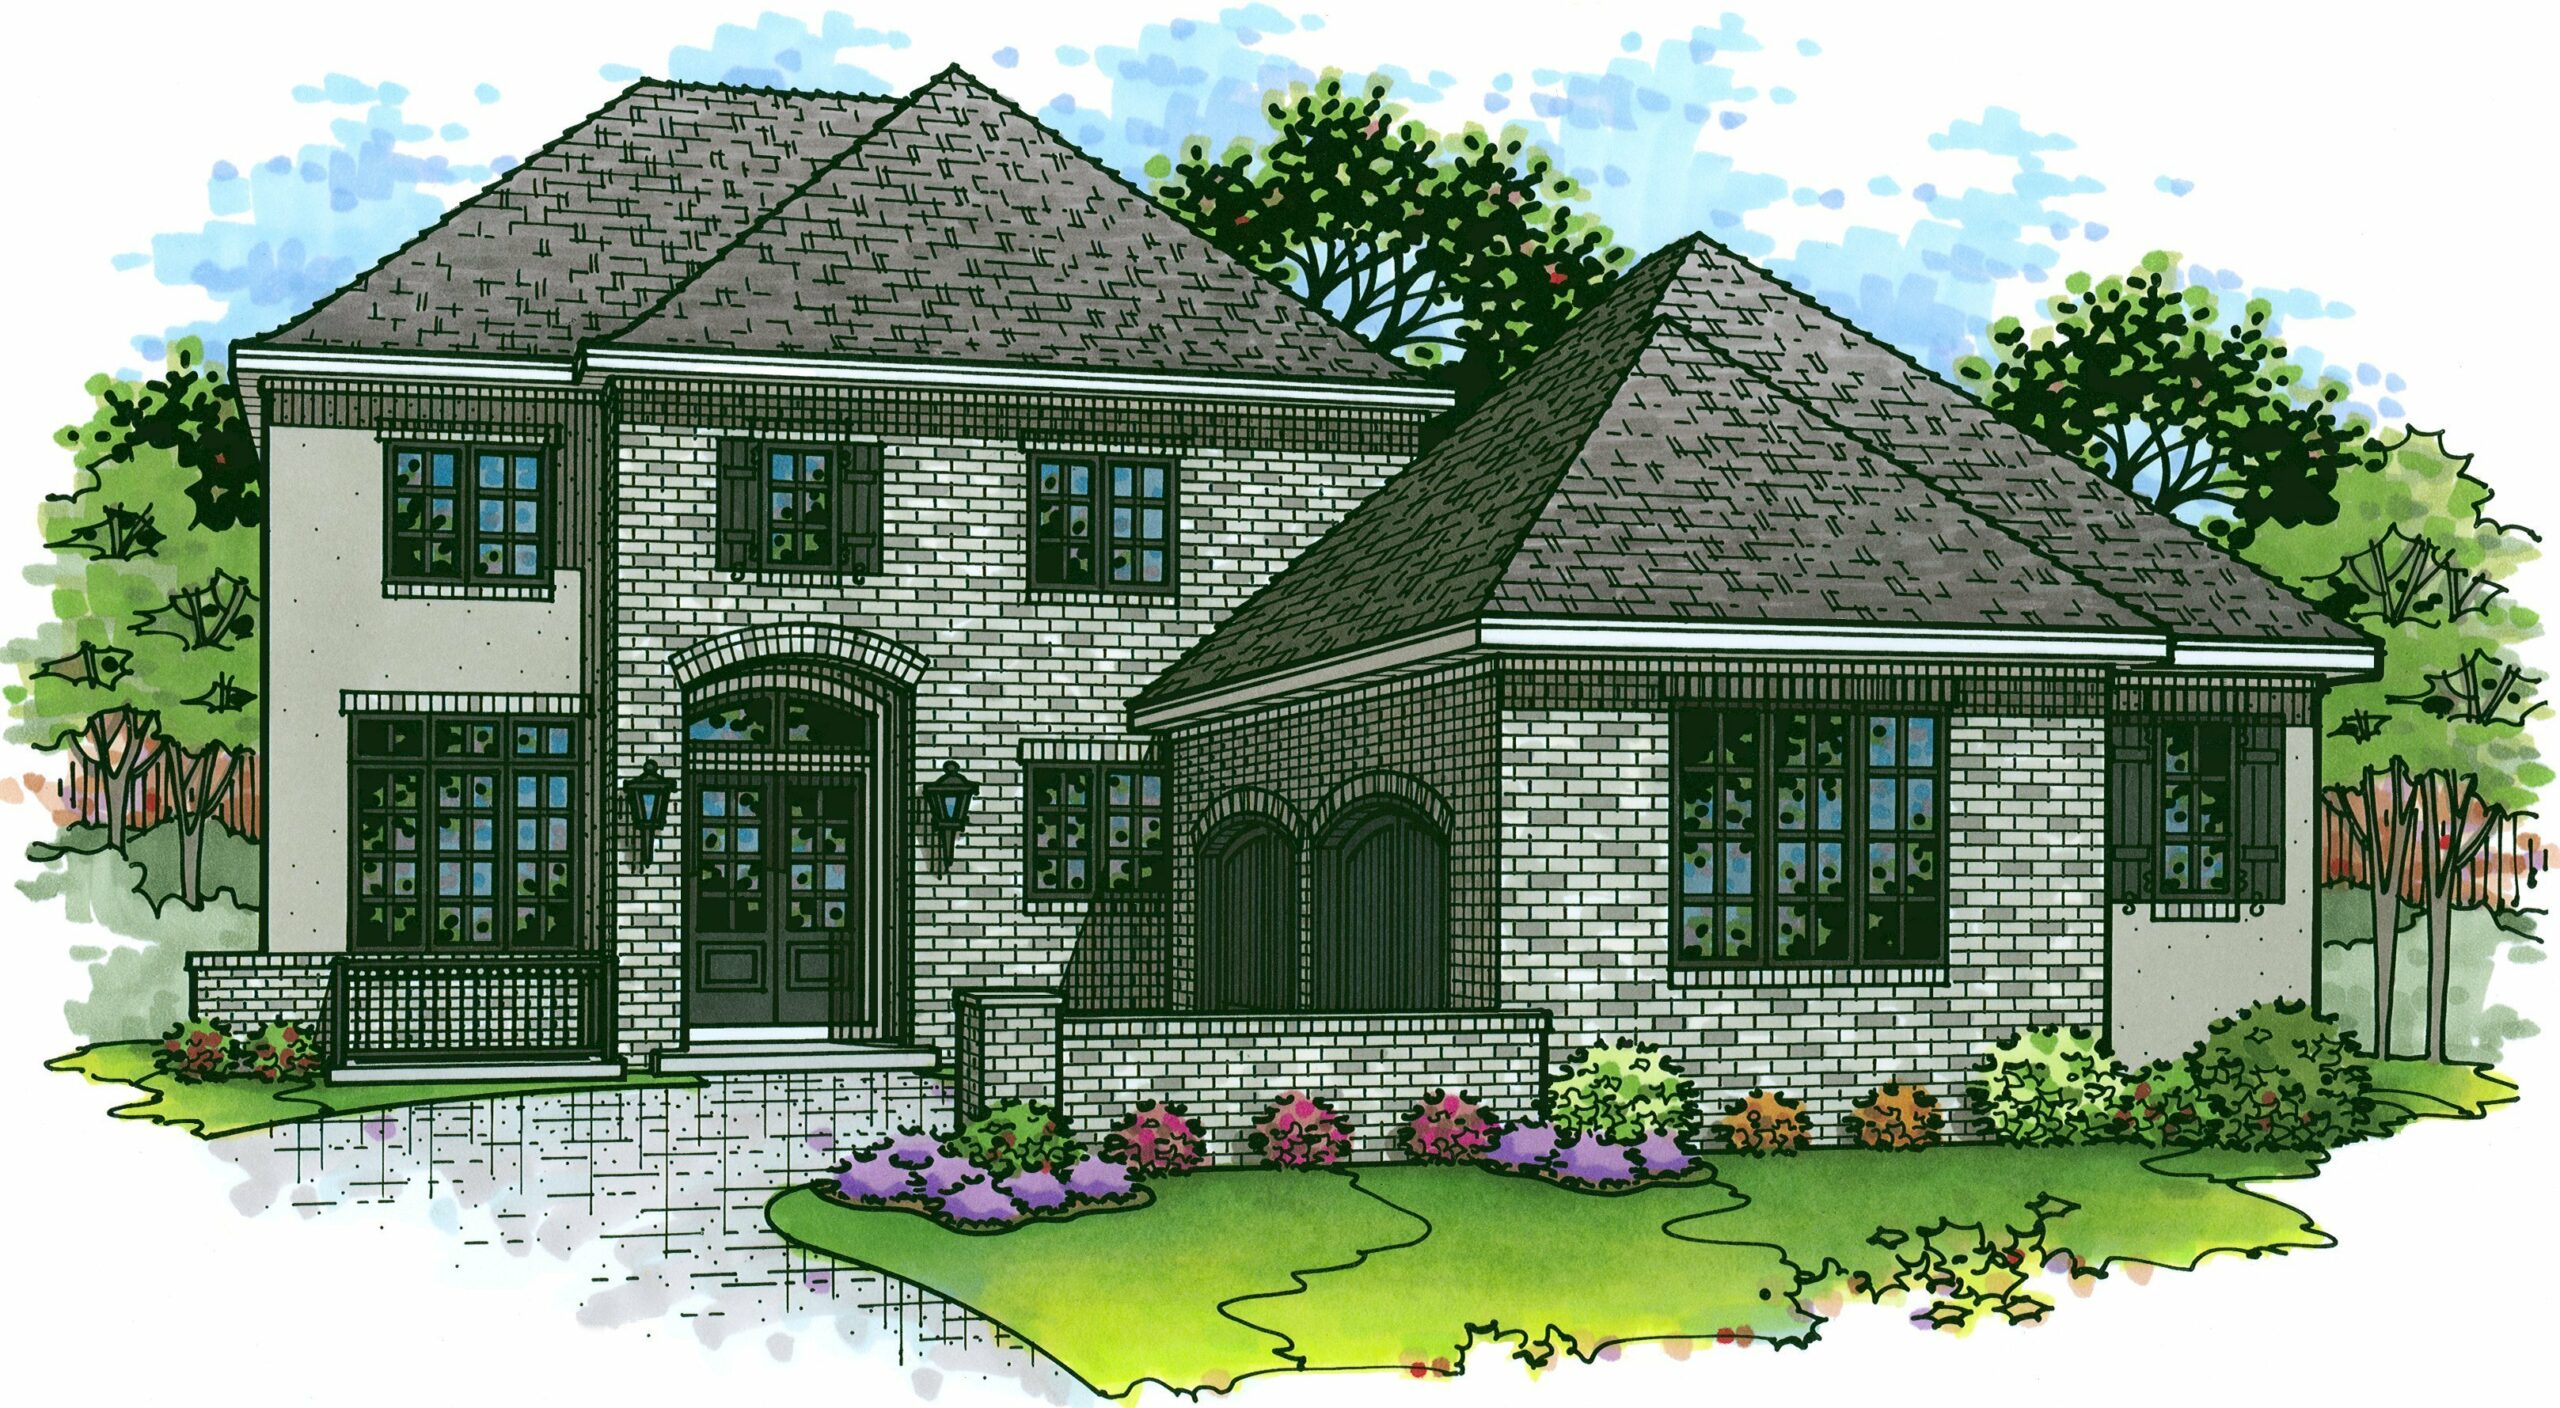 Rendering of the front elevation of the Barrington model from Lambie Homes